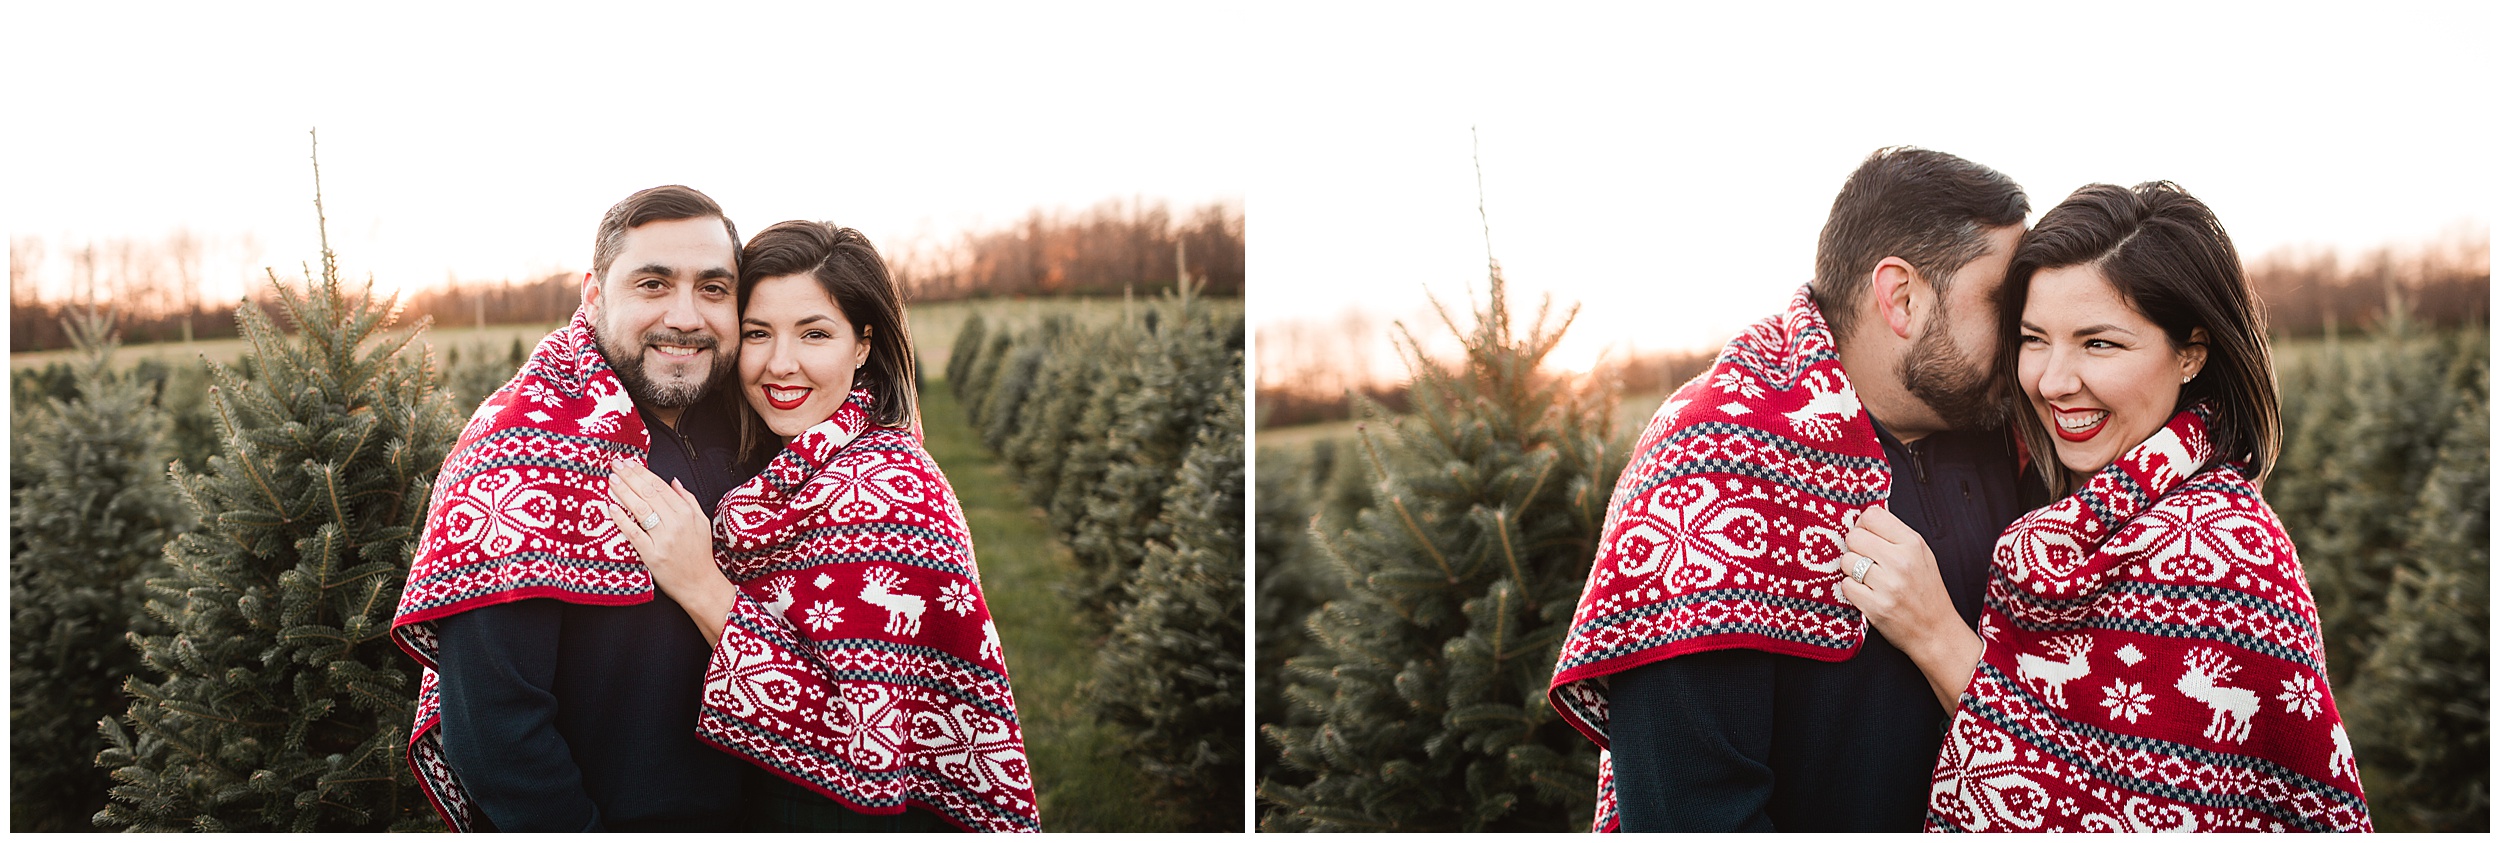 Dull's Tree Farm Family Photography Session